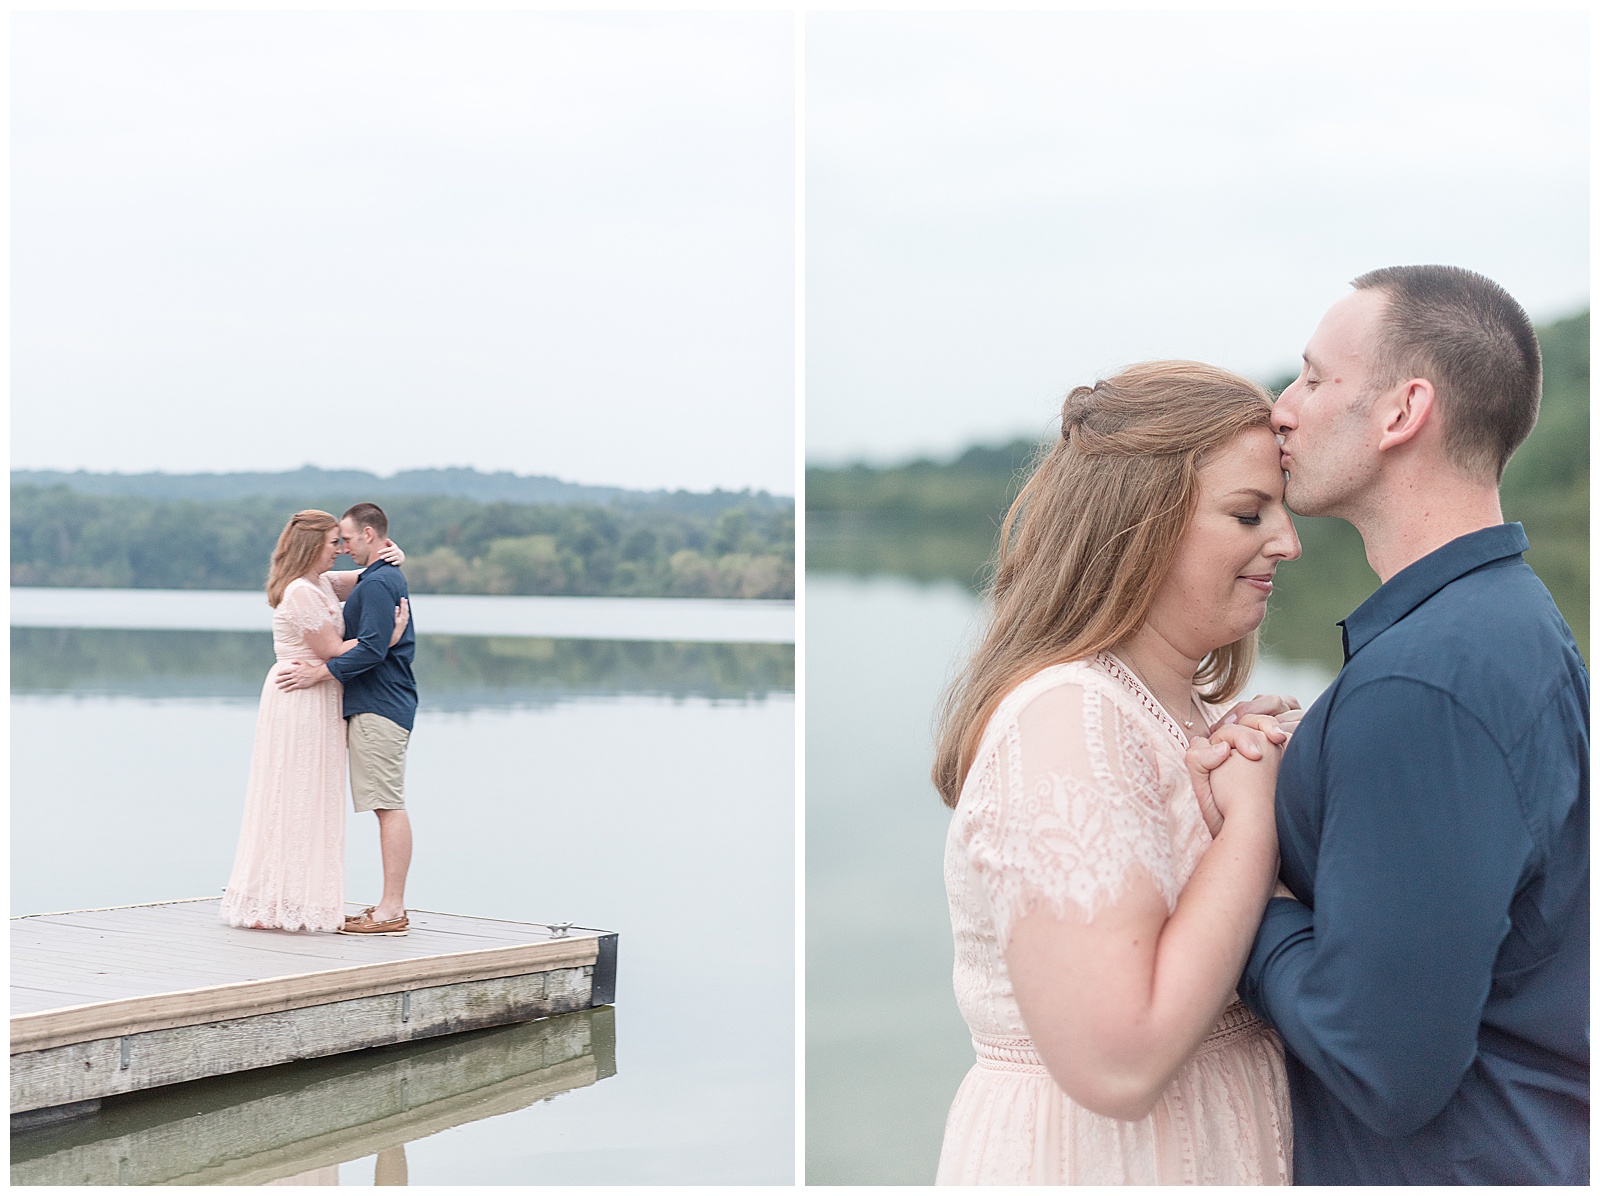 engaged couple standing close with hands joined at end of wooden dock overlooking lake on cloudy day